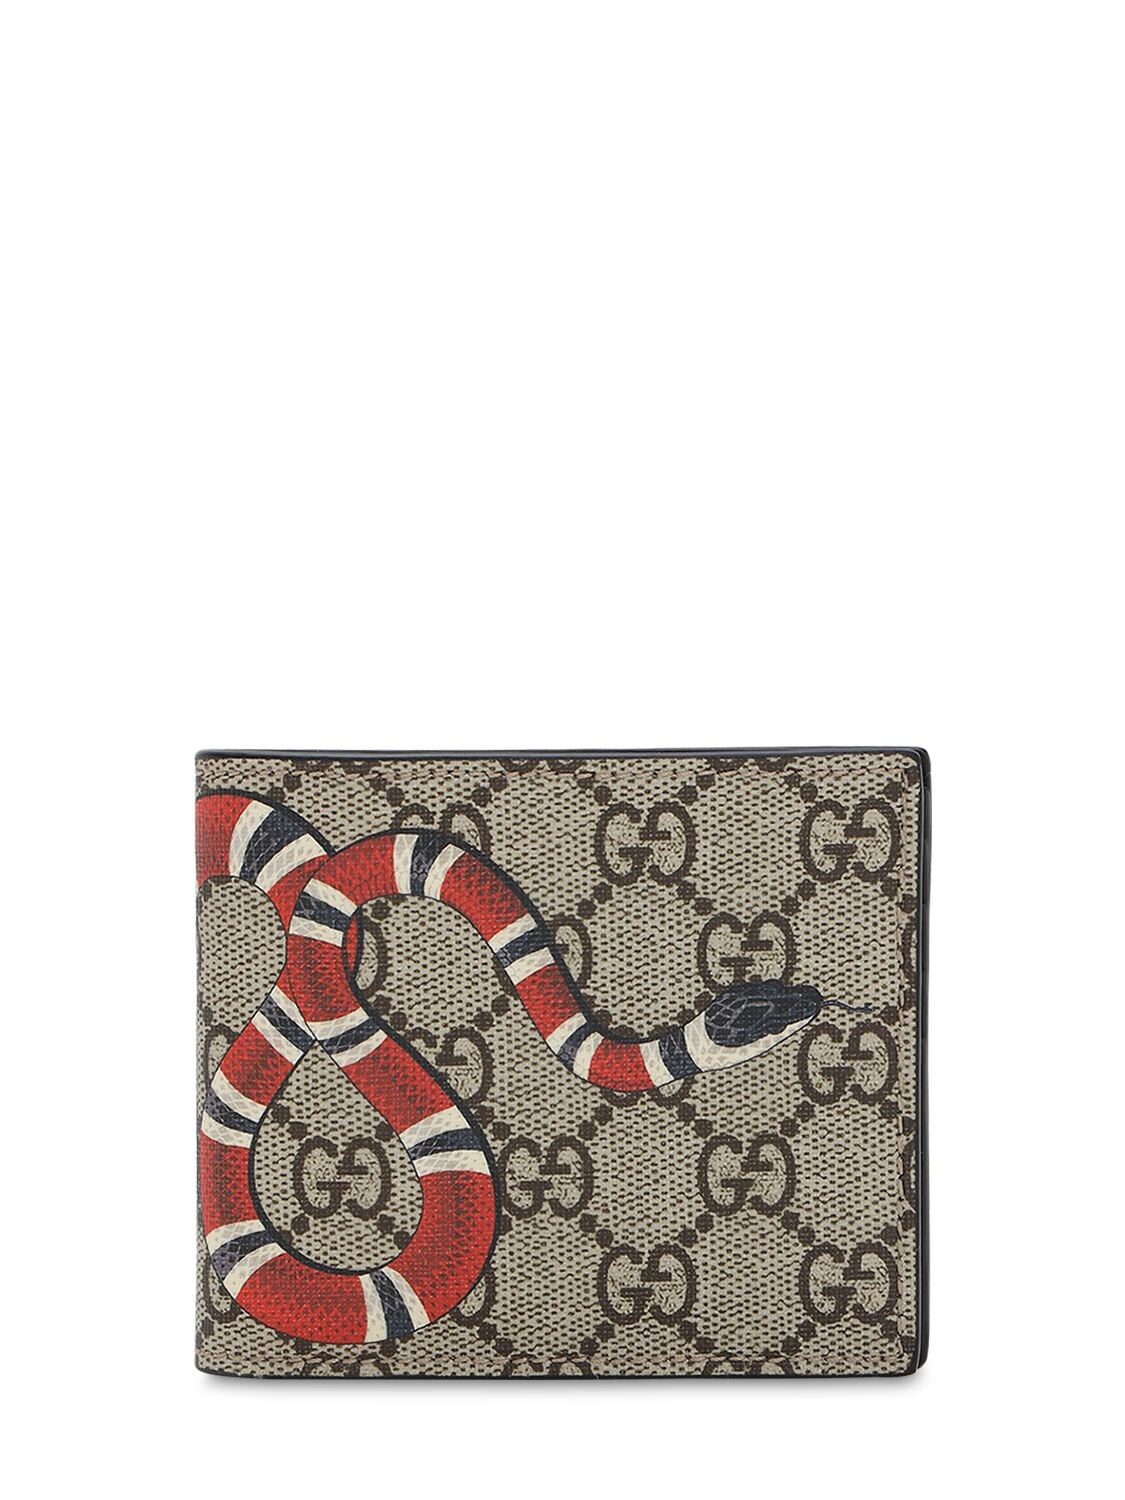 Gucci Snake Printed Coated Canvas Wallet In Beige